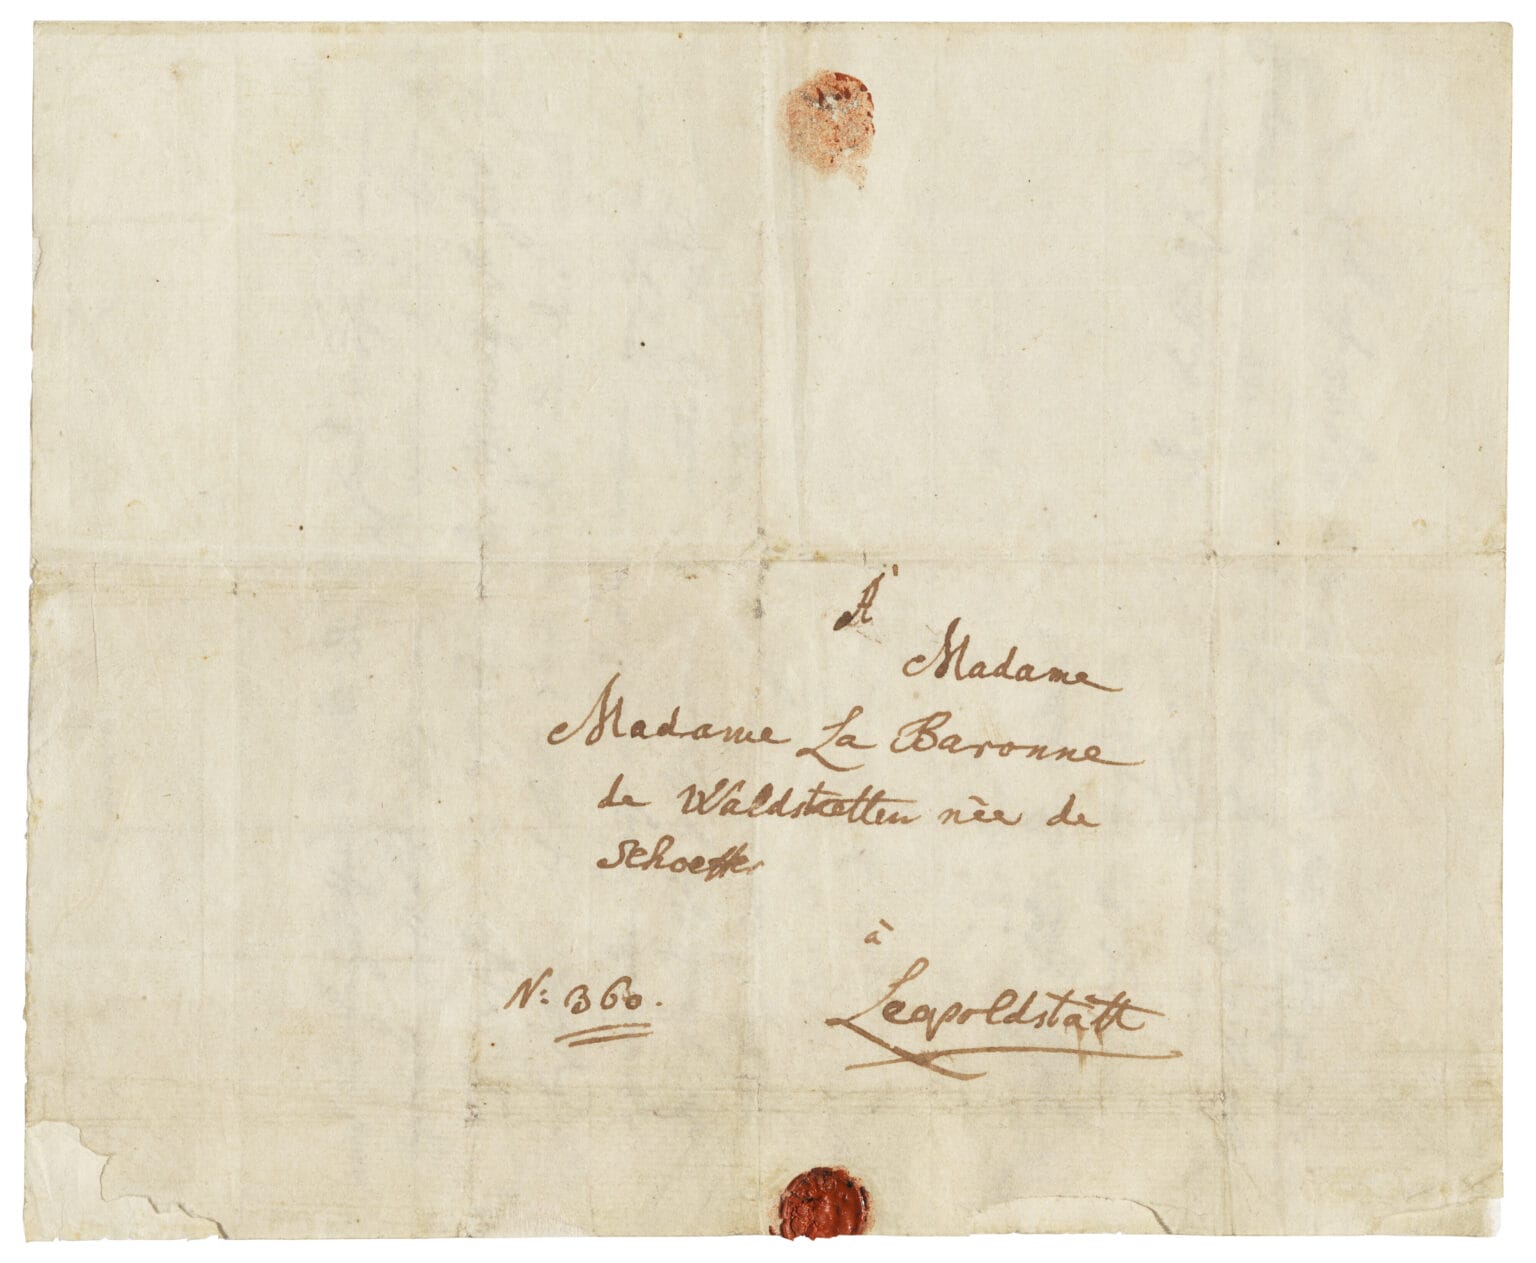 WOLFGANG AMADEUS MOZART (1756-1791), Autograph letter, signed, in German, (Vienna, shortly before 4 August 1782). Estimate: £300,000–500,000/€350,000-570,000